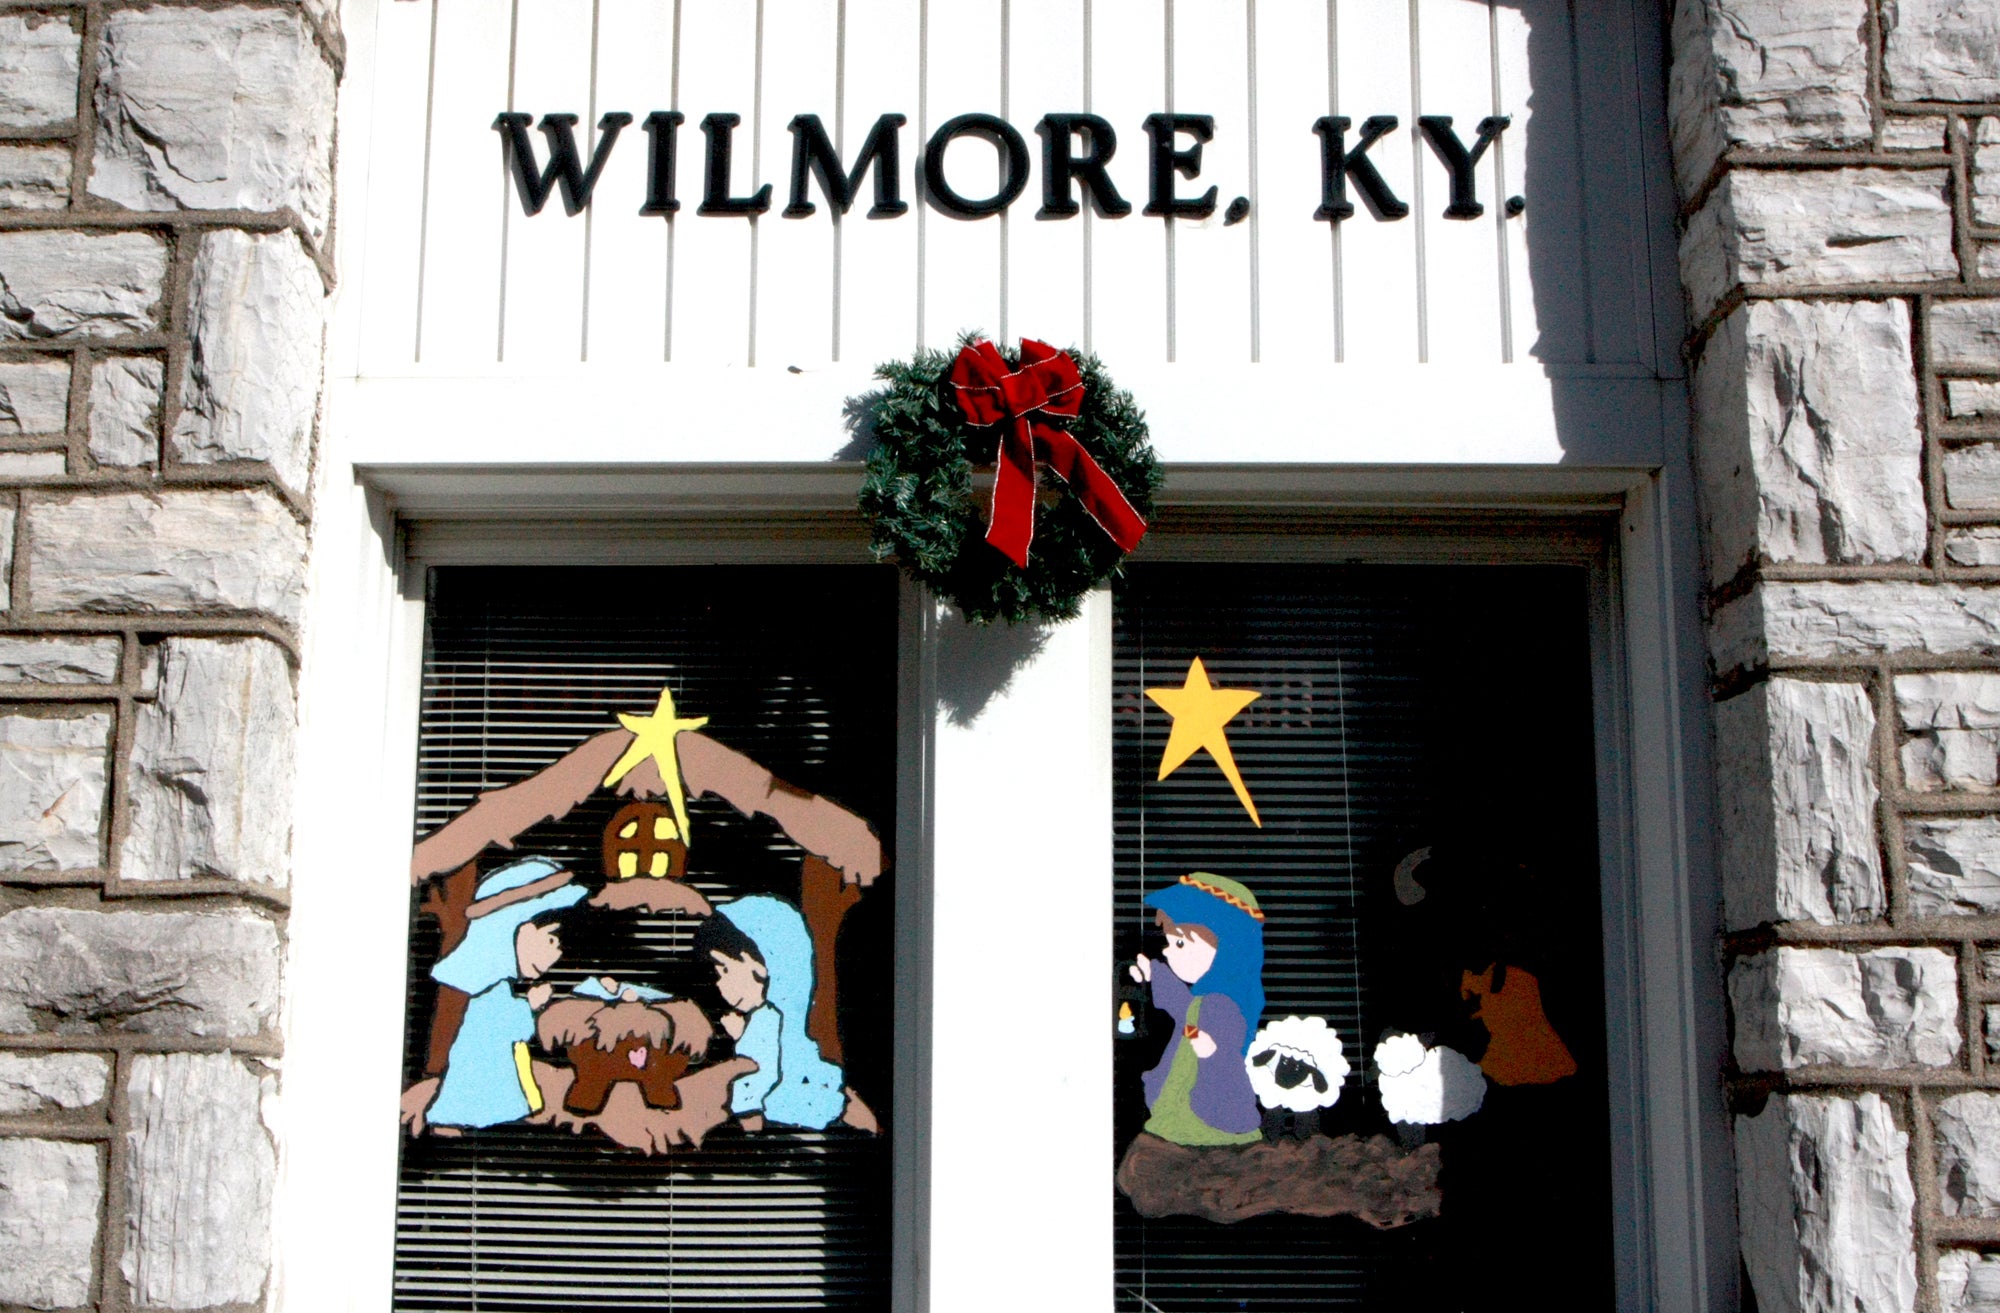 Wilmore prepares to celebrate Christmas the old fashioned way